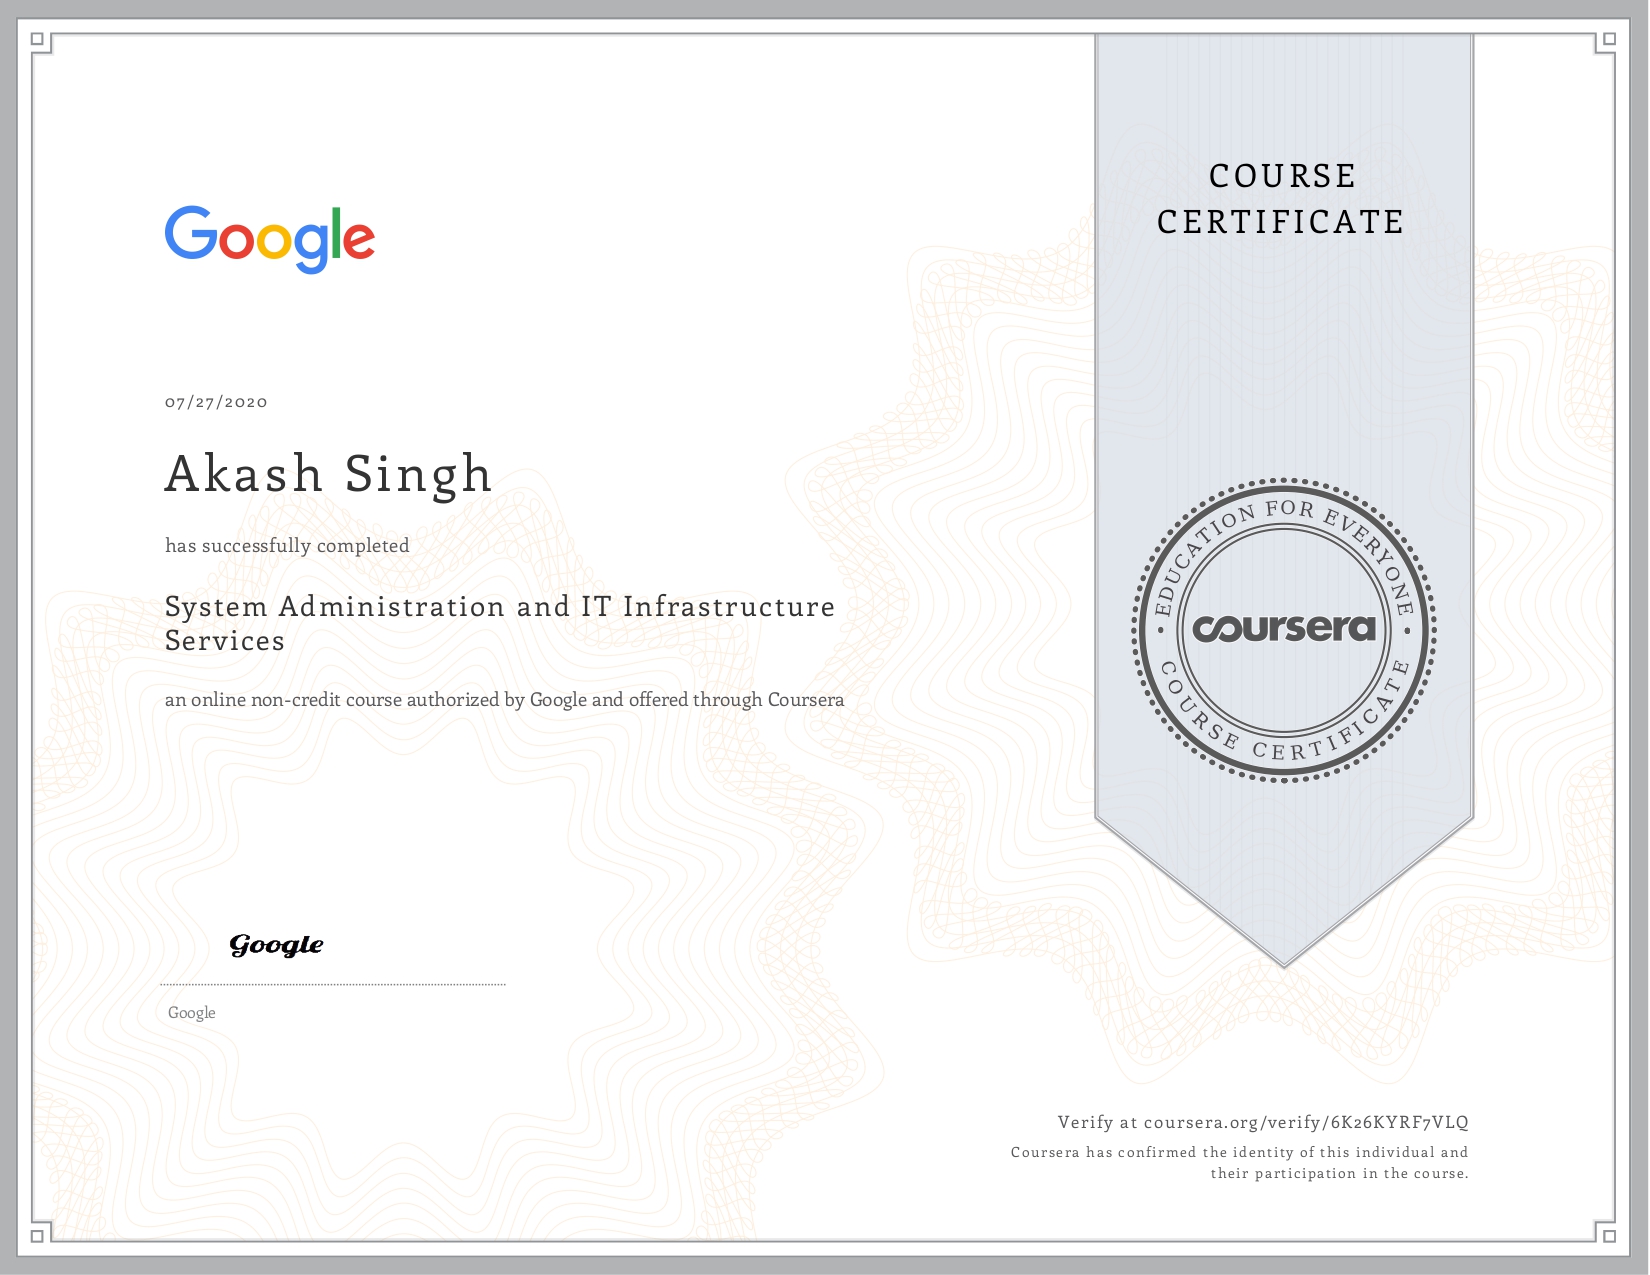 ' Coursera Certifications '_pages-to-jpg-0013.jpg